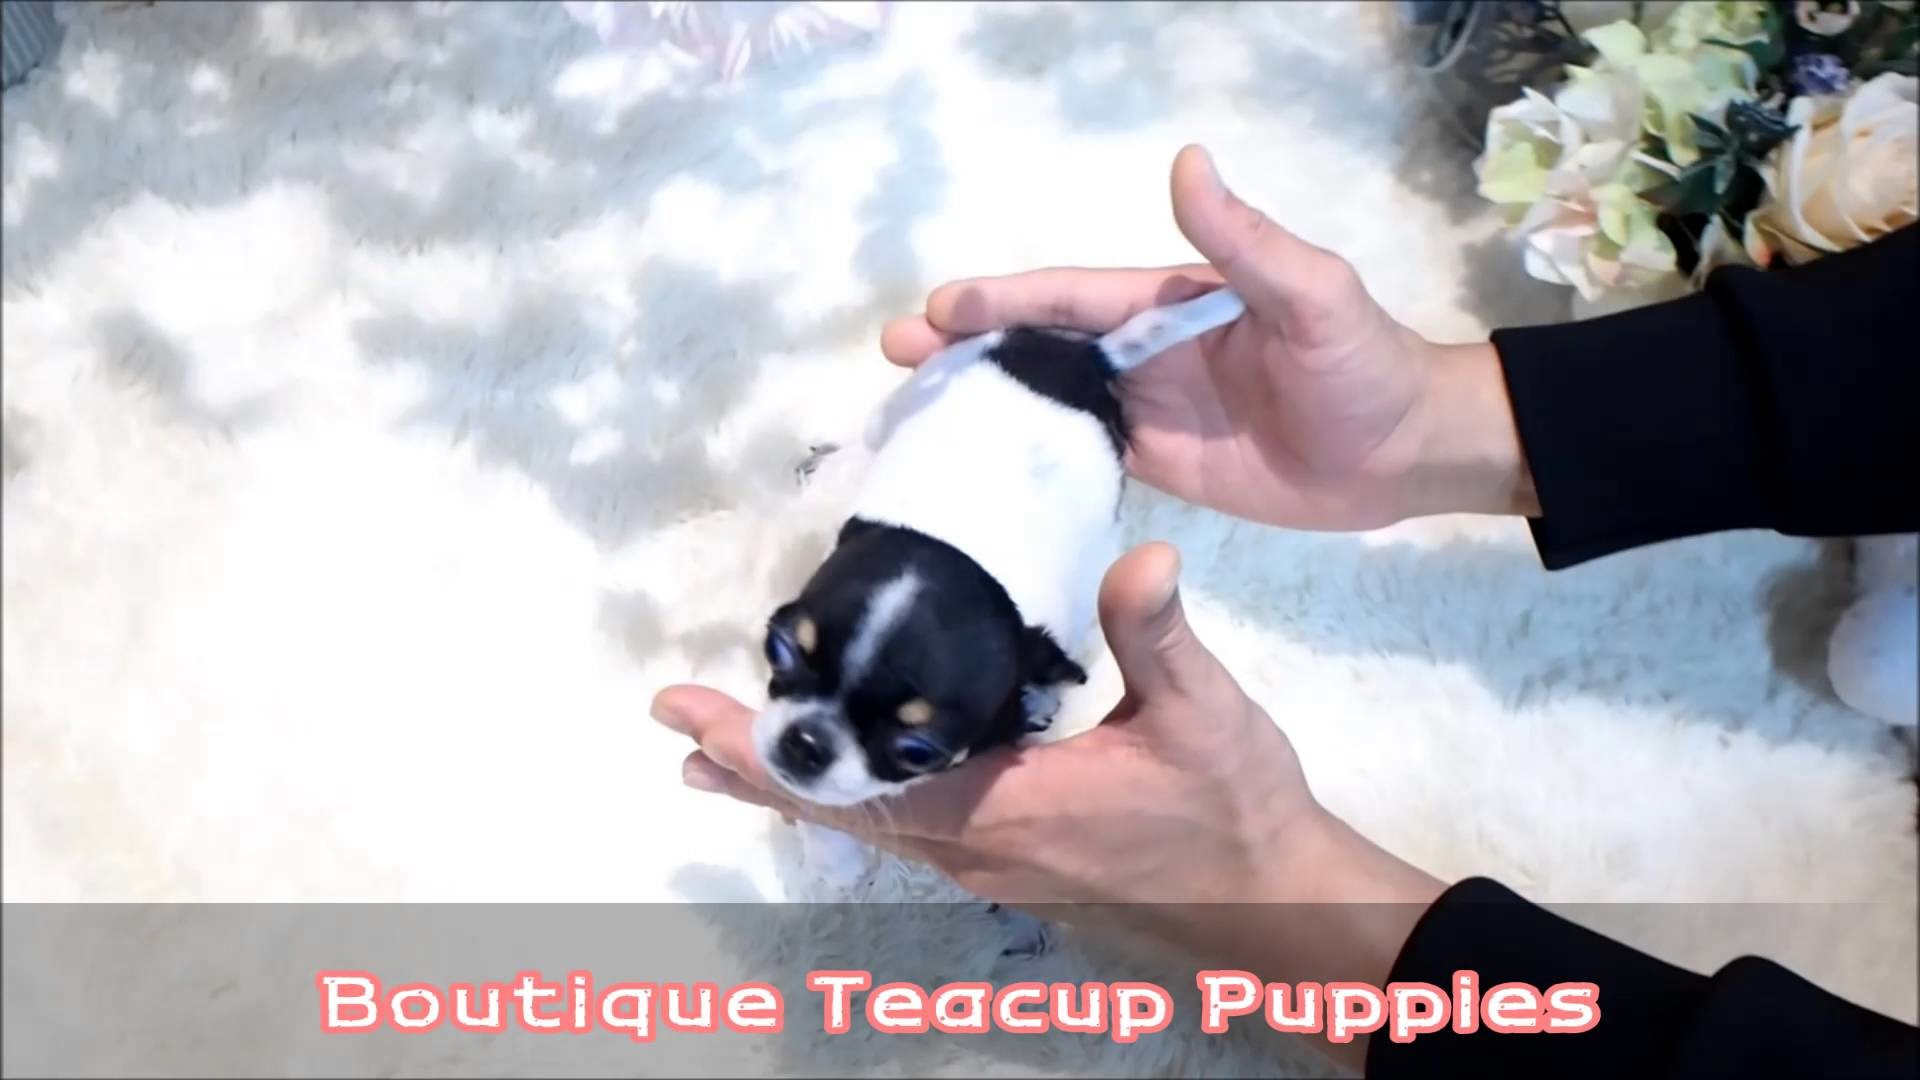 1920x1080 Alvin Chihuahua Teacup 1 1/2 pounds now at 6 months Available!